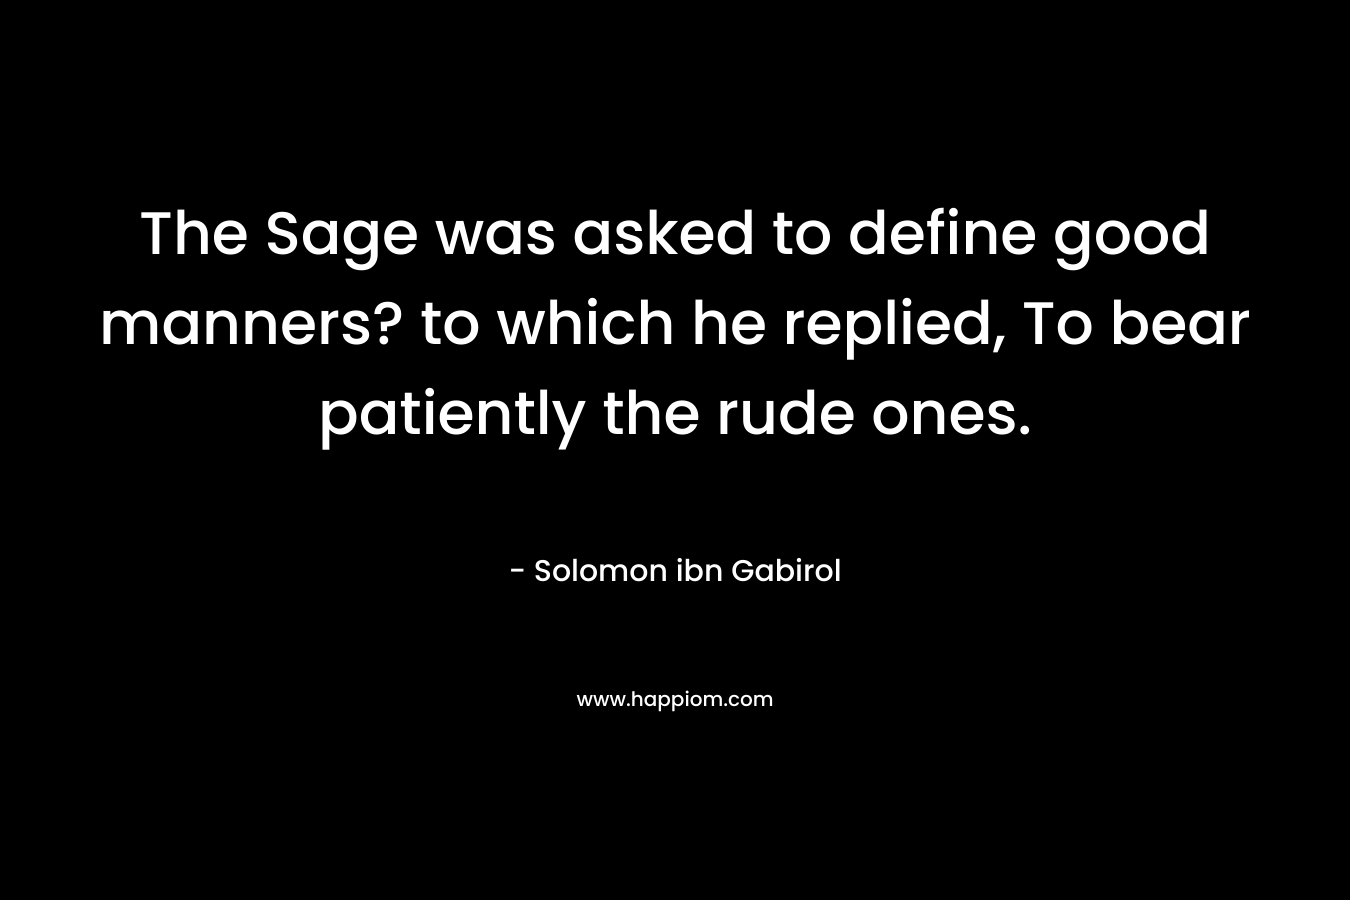 The Sage was asked to define good manners? to which he replied, To bear patiently the rude ones. – Solomon ibn Gabirol